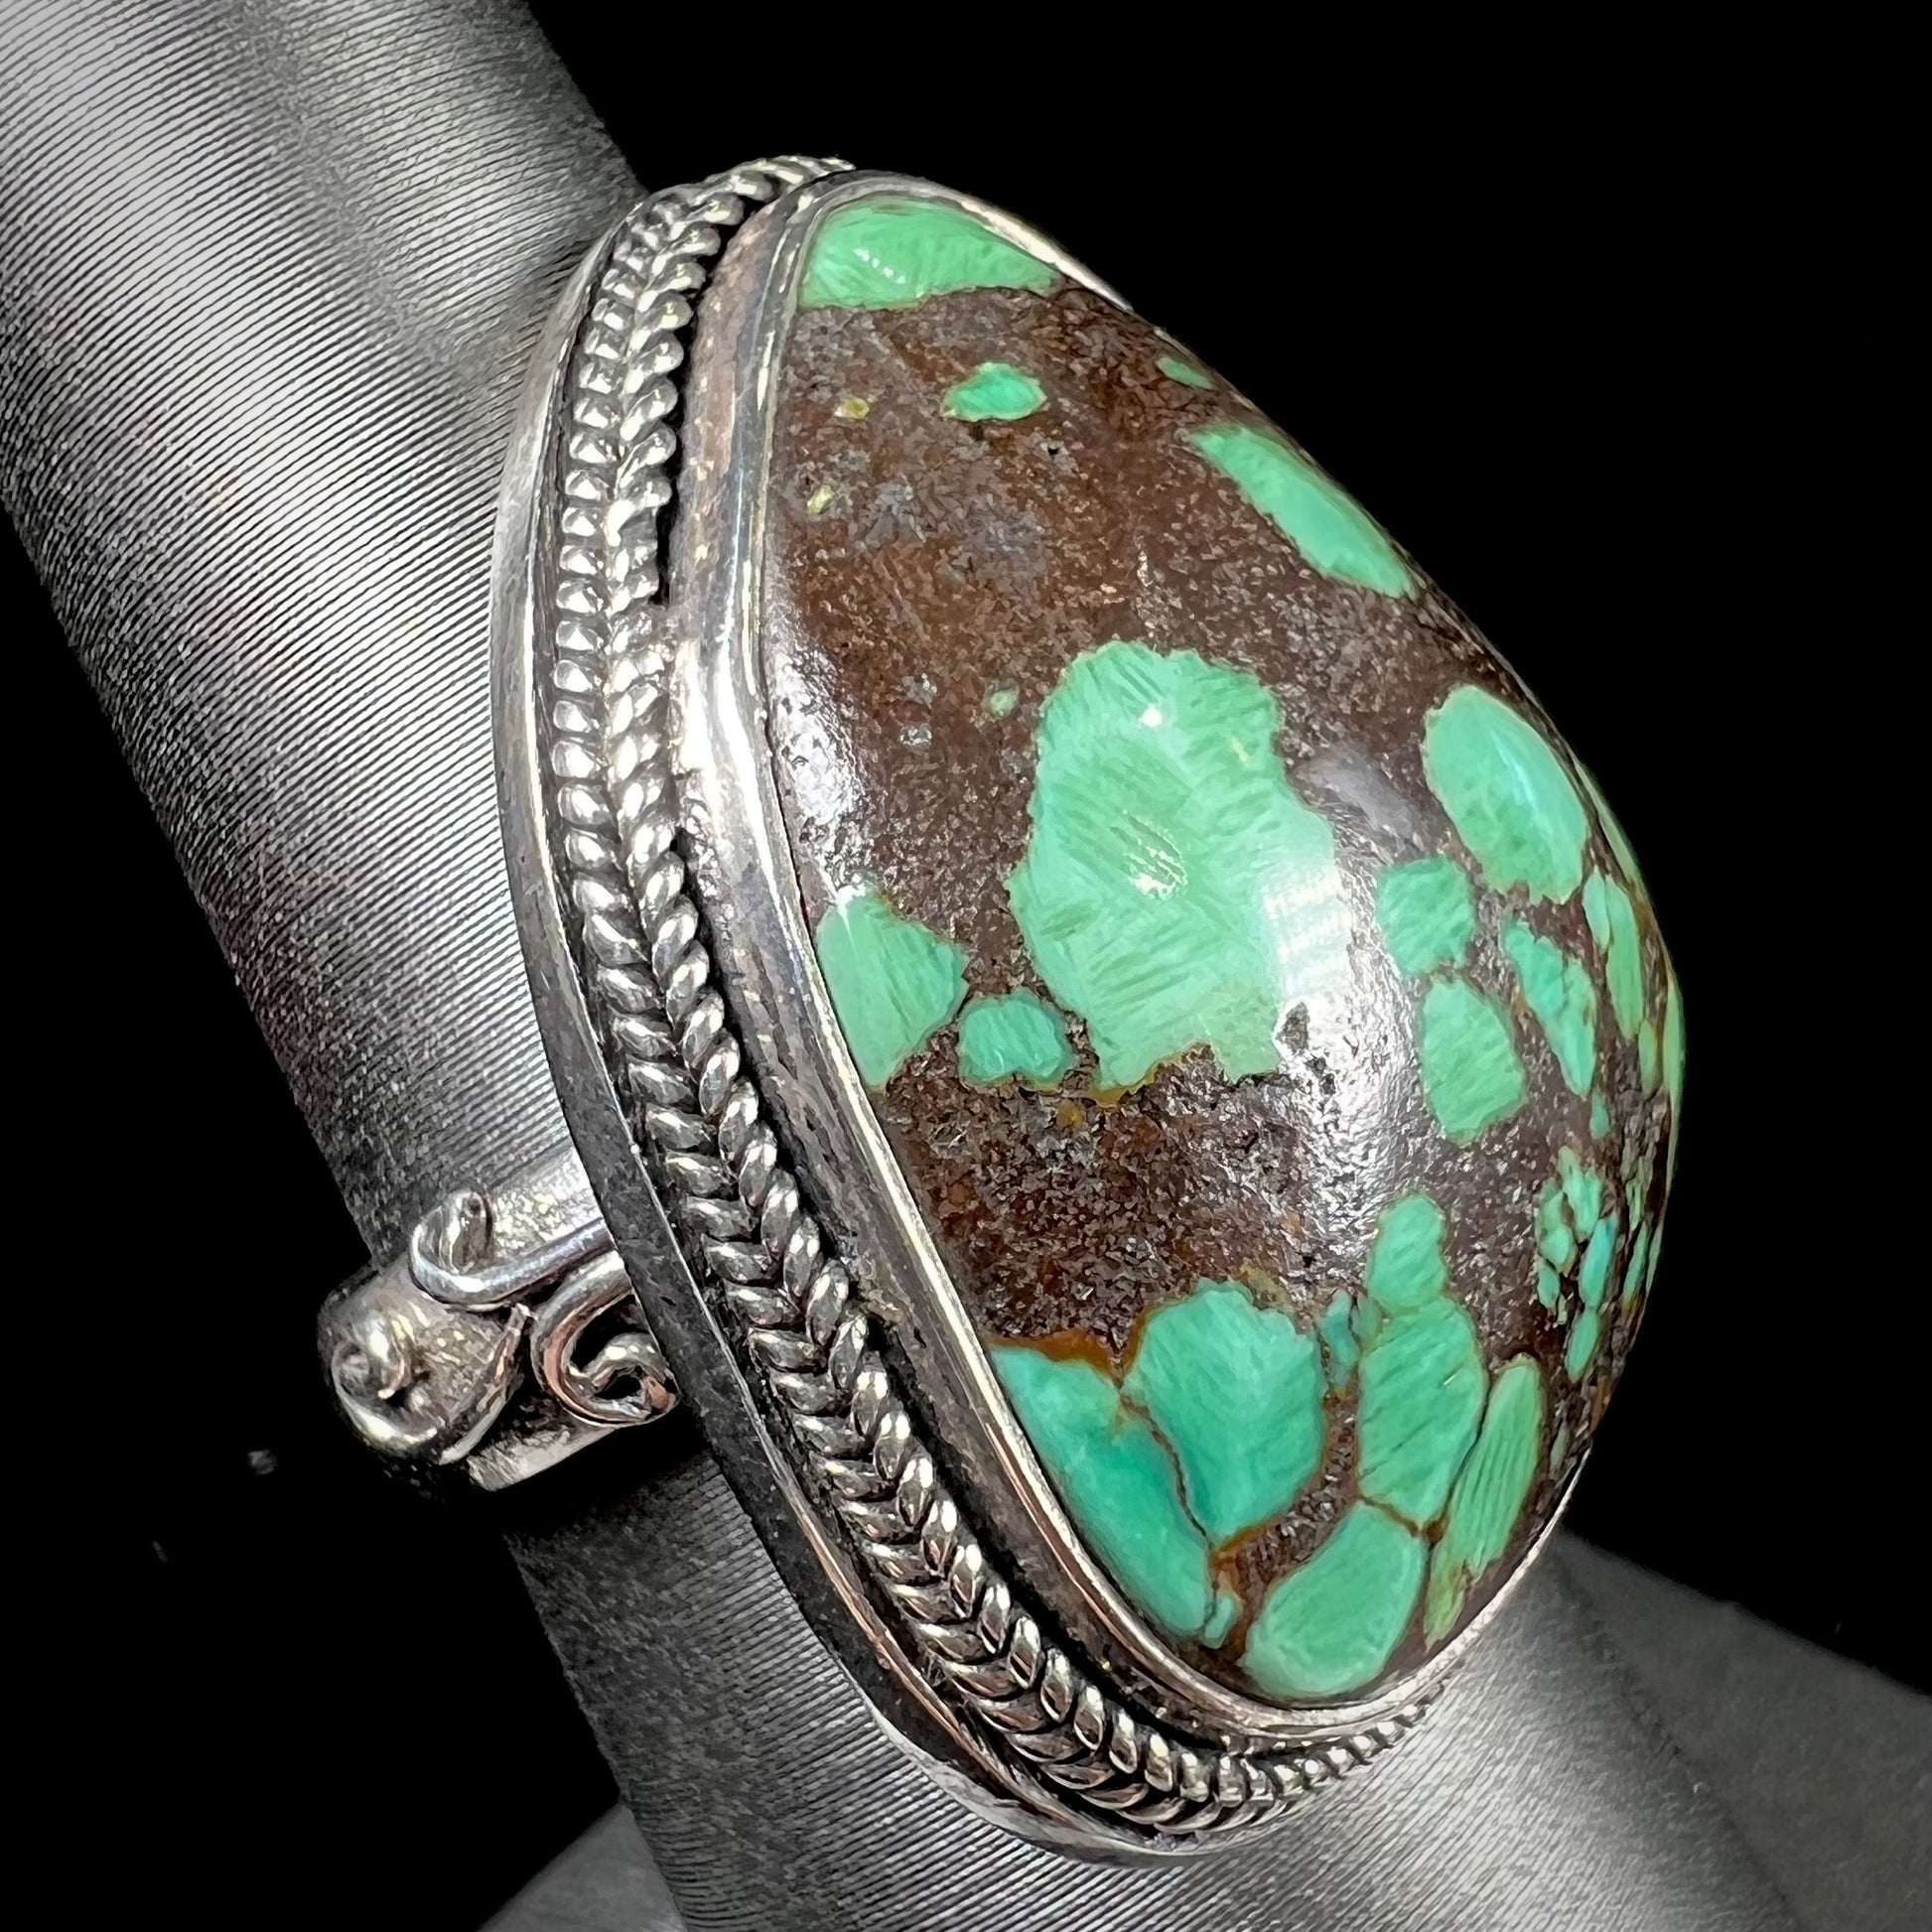 A sterling silver ring bezel set with a green spotted turquoise stone from Carico Lake, Nevada.